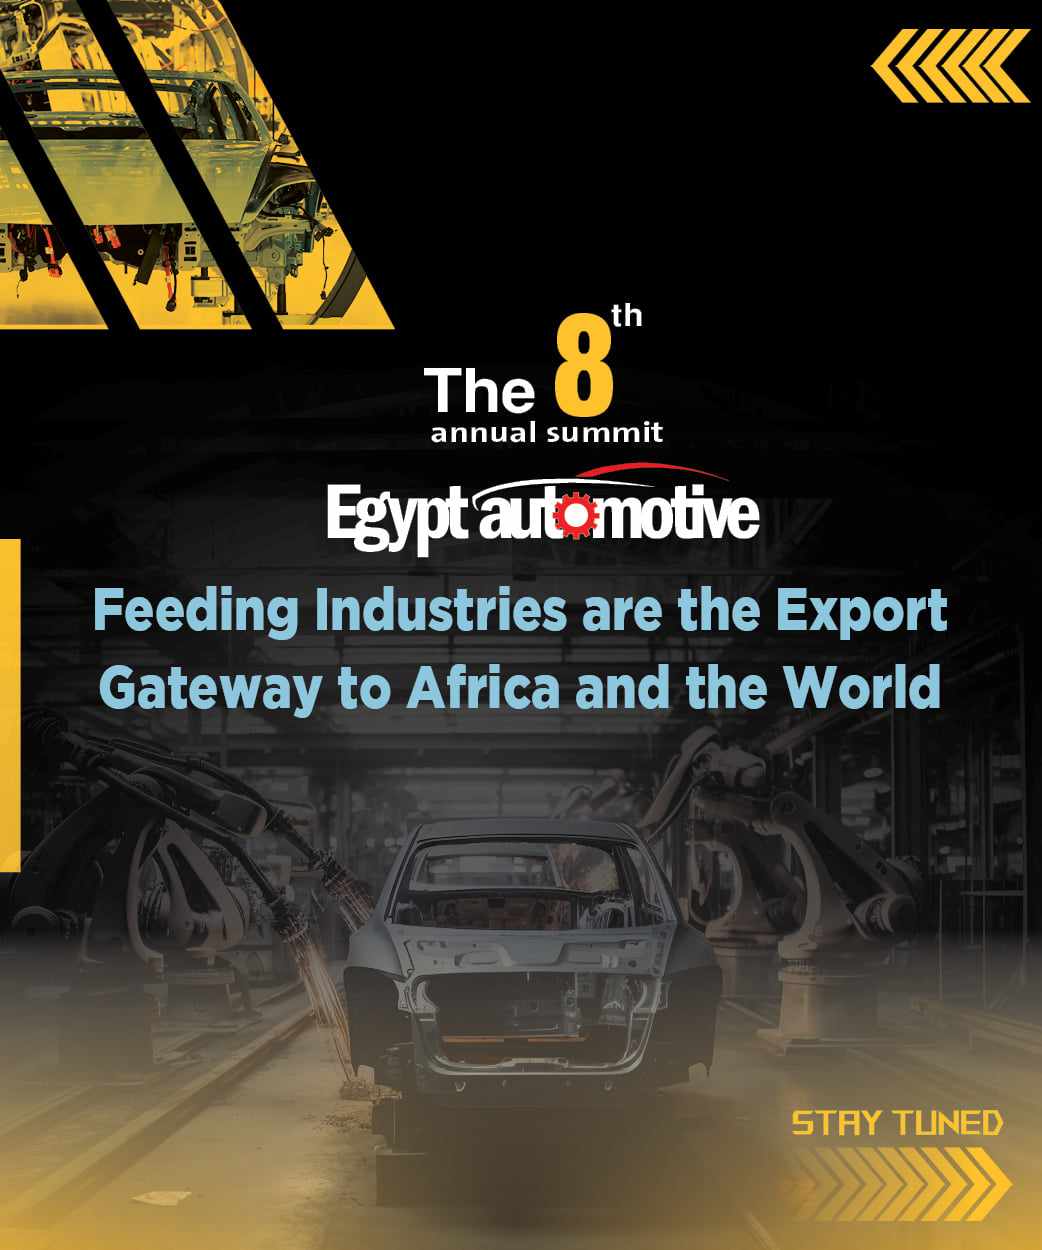 The 8th Annual Summit of Egypt Automotive